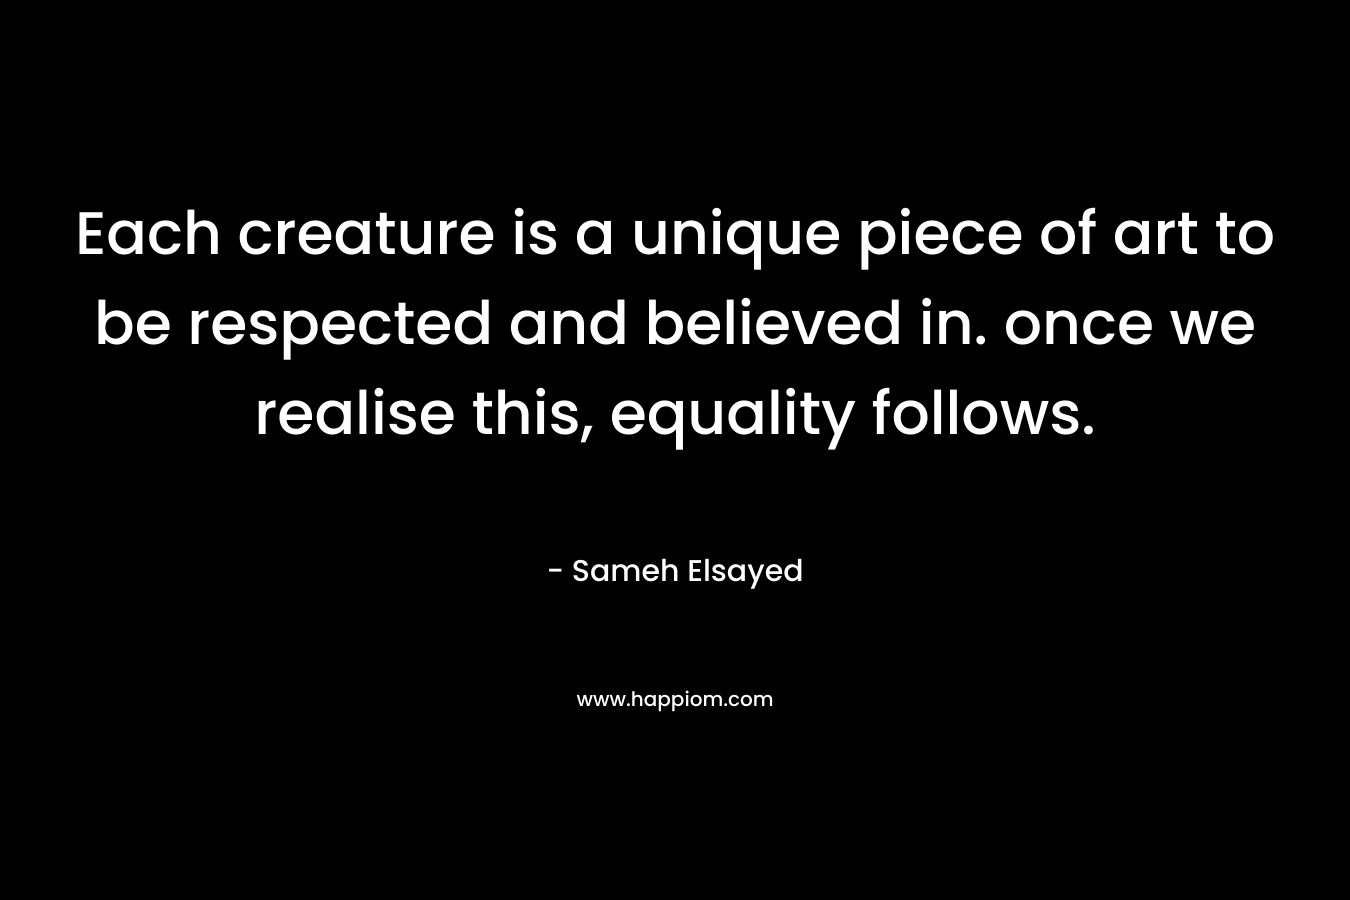 Each creature is a unique piece of art to be respected and believed in. once we realise this, equality follows.